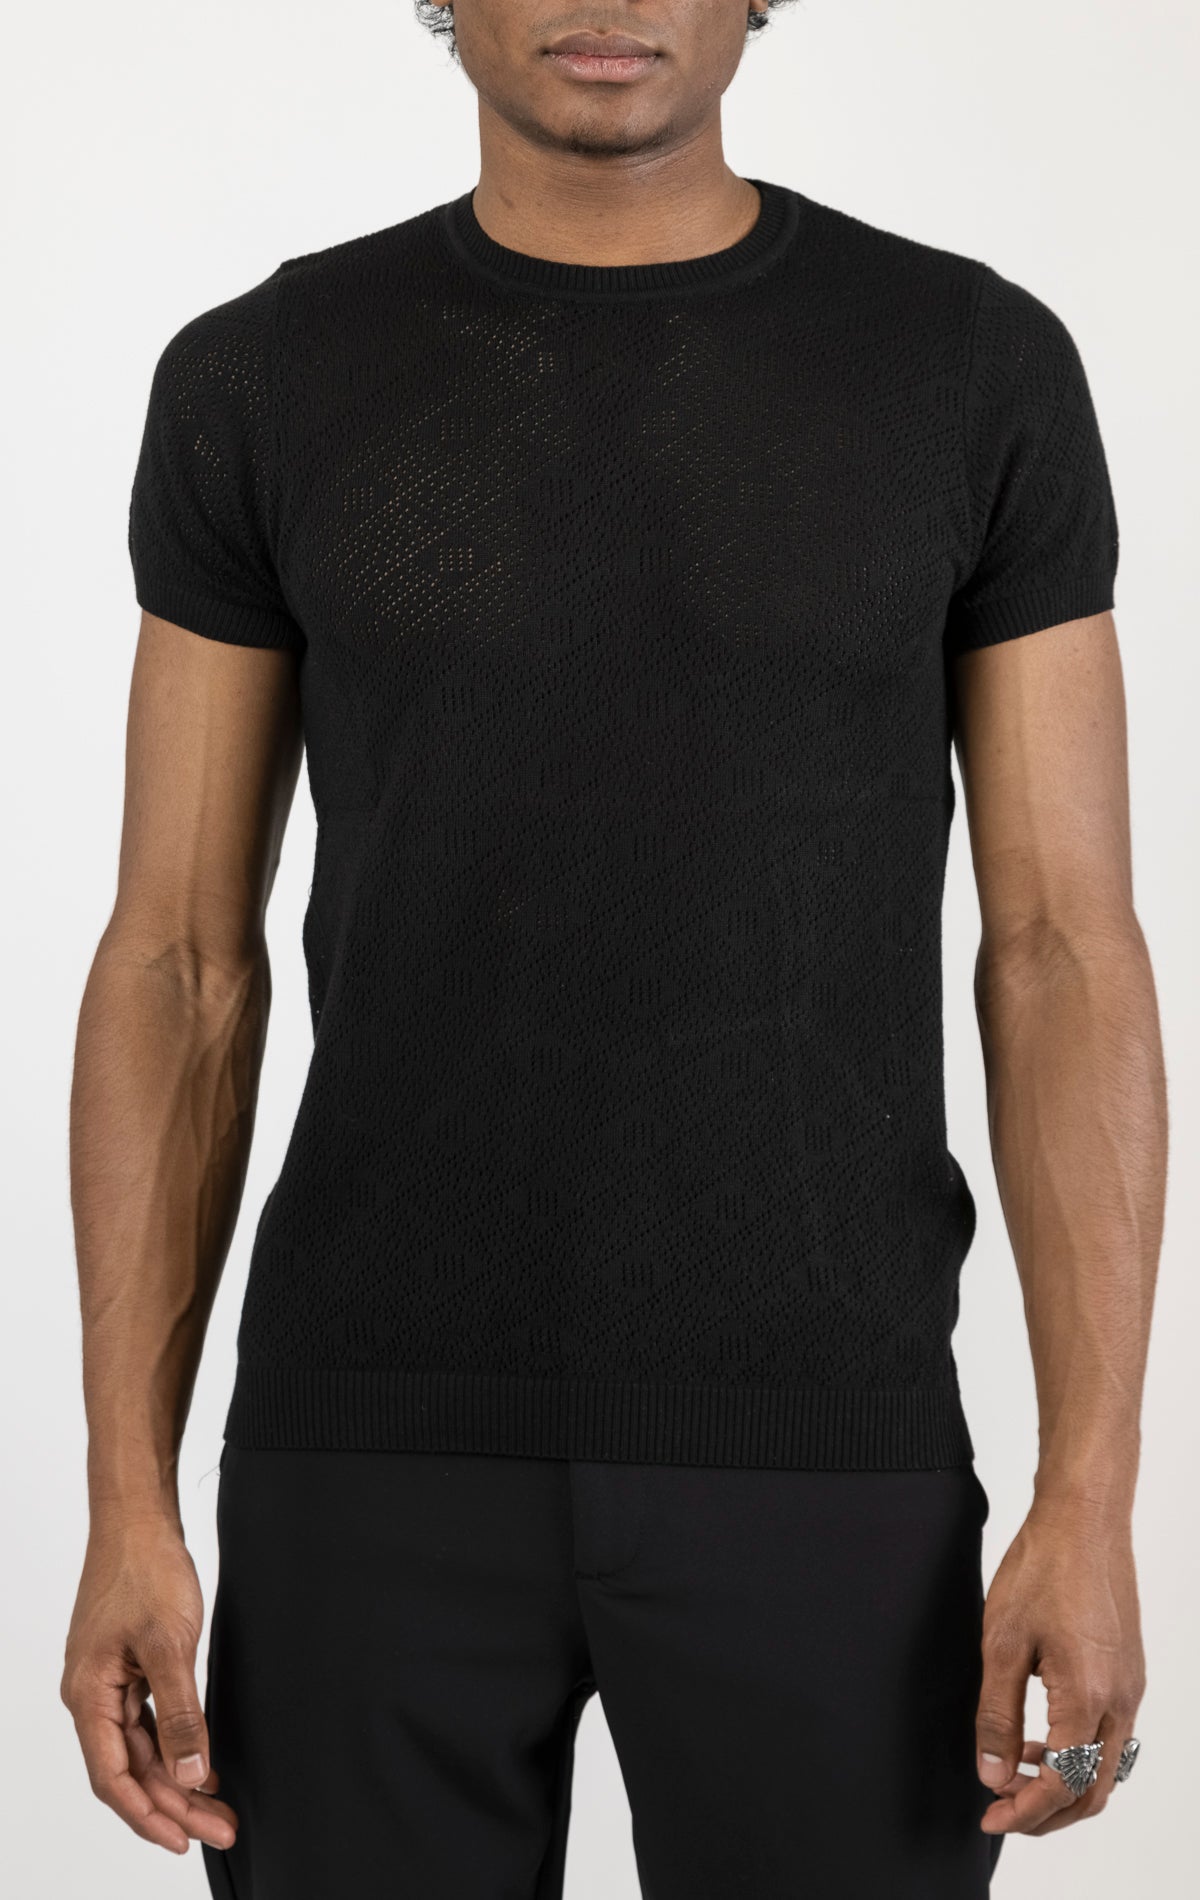 Women's geometric crochet knit top in black. The top is made from a 50% viscose, 50% polyamide blend and features a unique geometric crochet pattern.